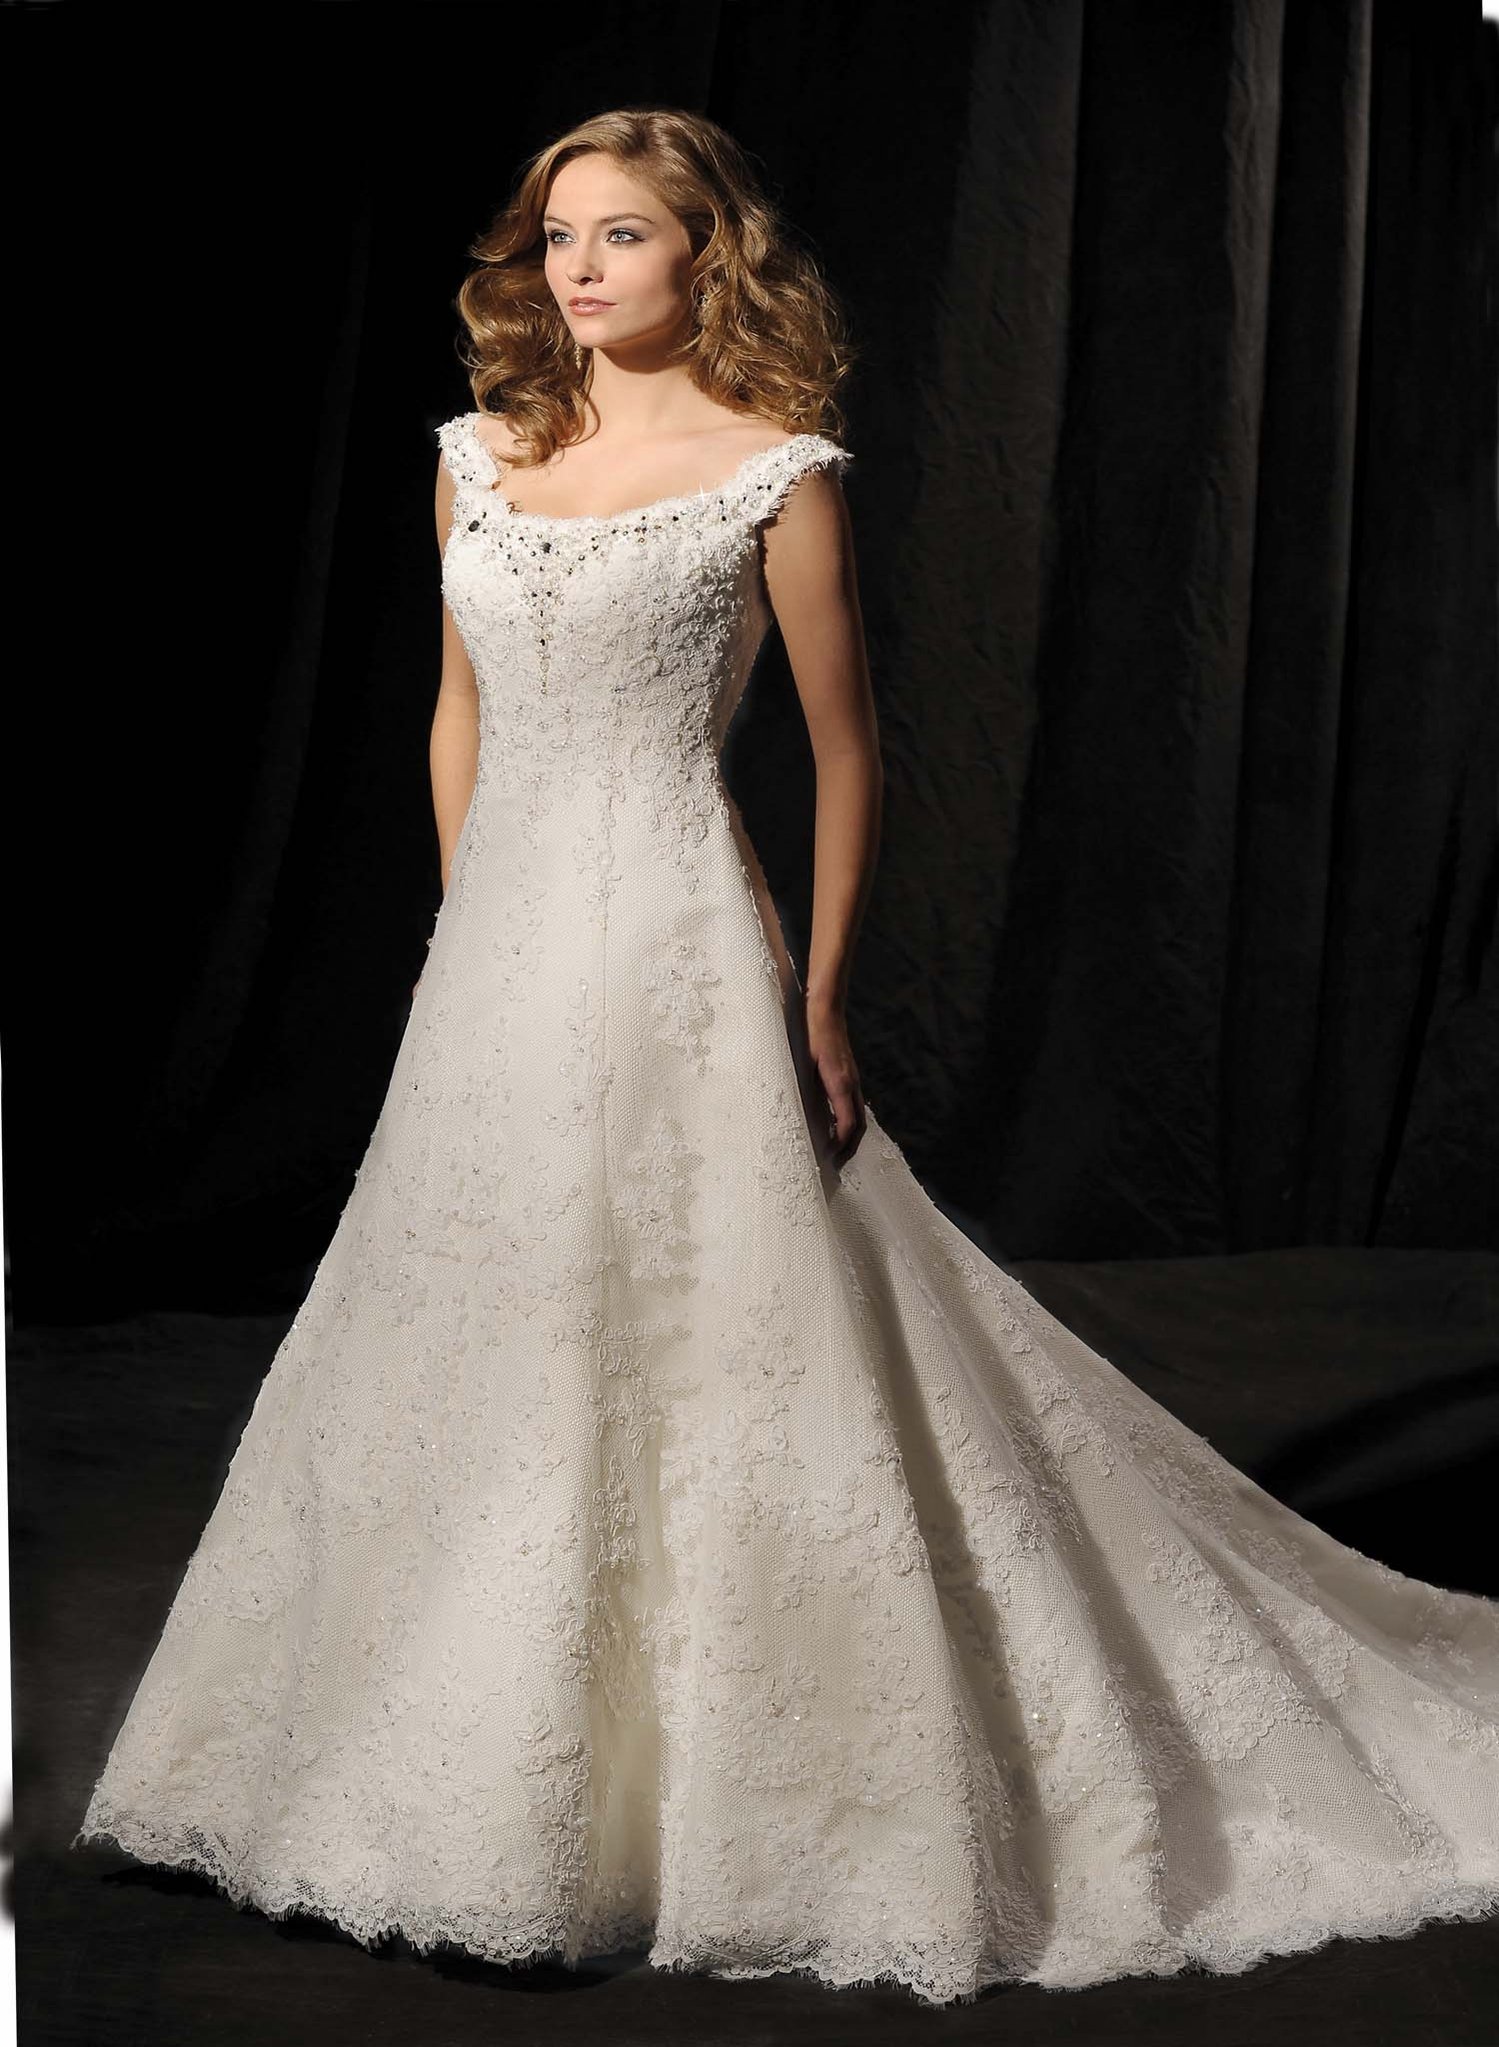 Best All Lace Wedding Dress The Ultimate Guide Blackwedding3 3744